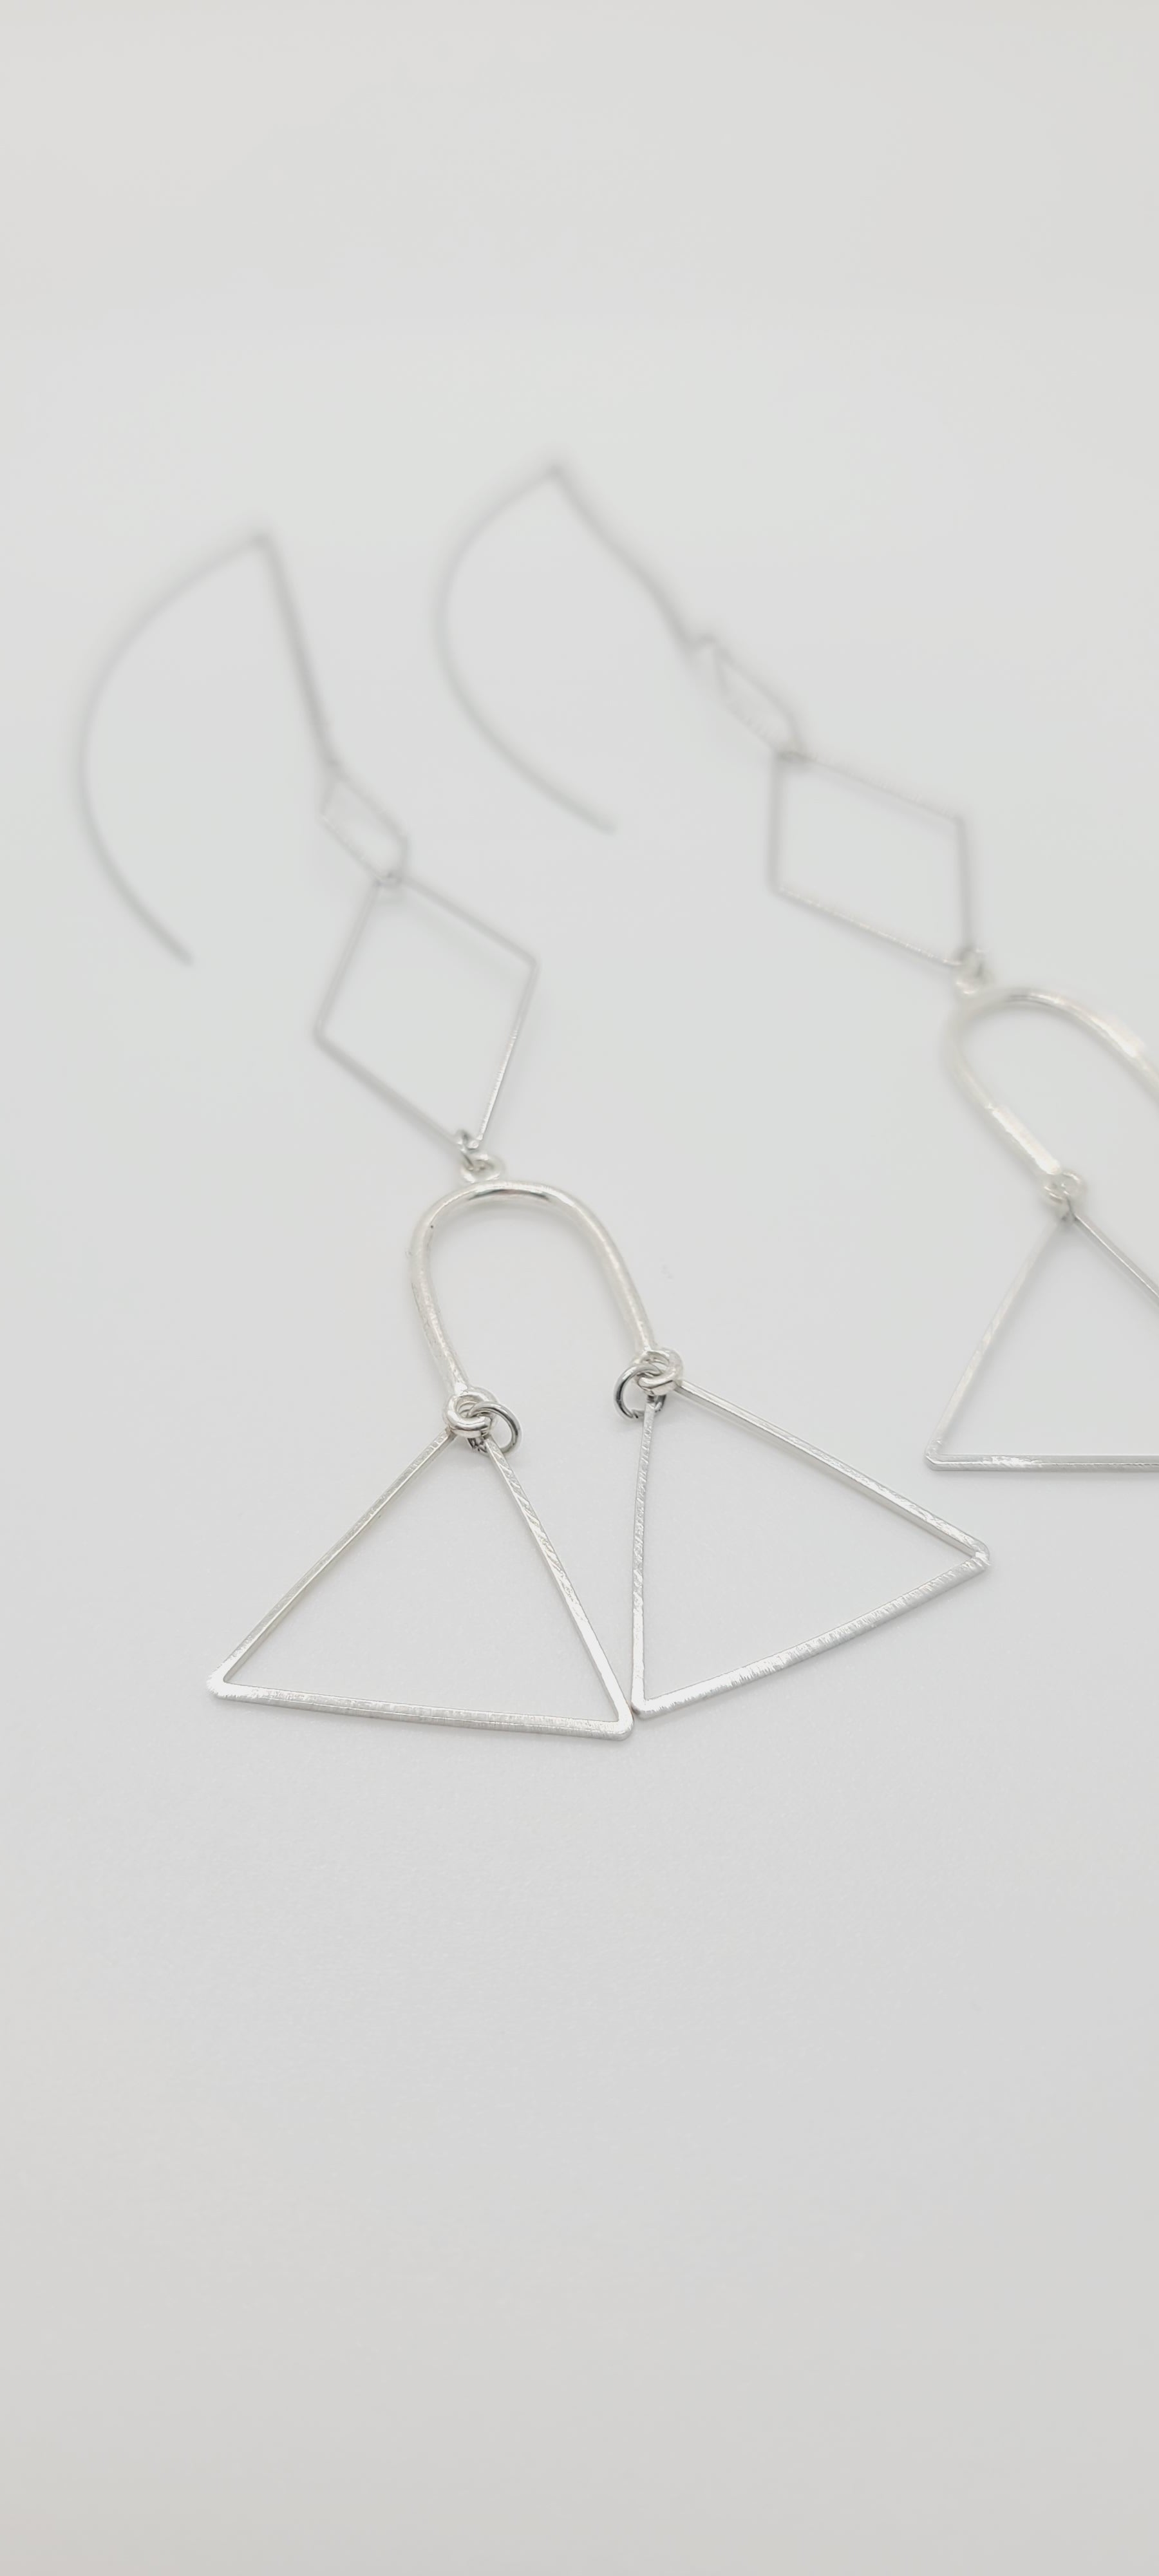 Length: 6 inches | Weight: 0.2 ounces  Distinctly You! These silver wire hook earrings are made with silver chains, silver charms in shapes of diamonds, triangles, and horseshoes.